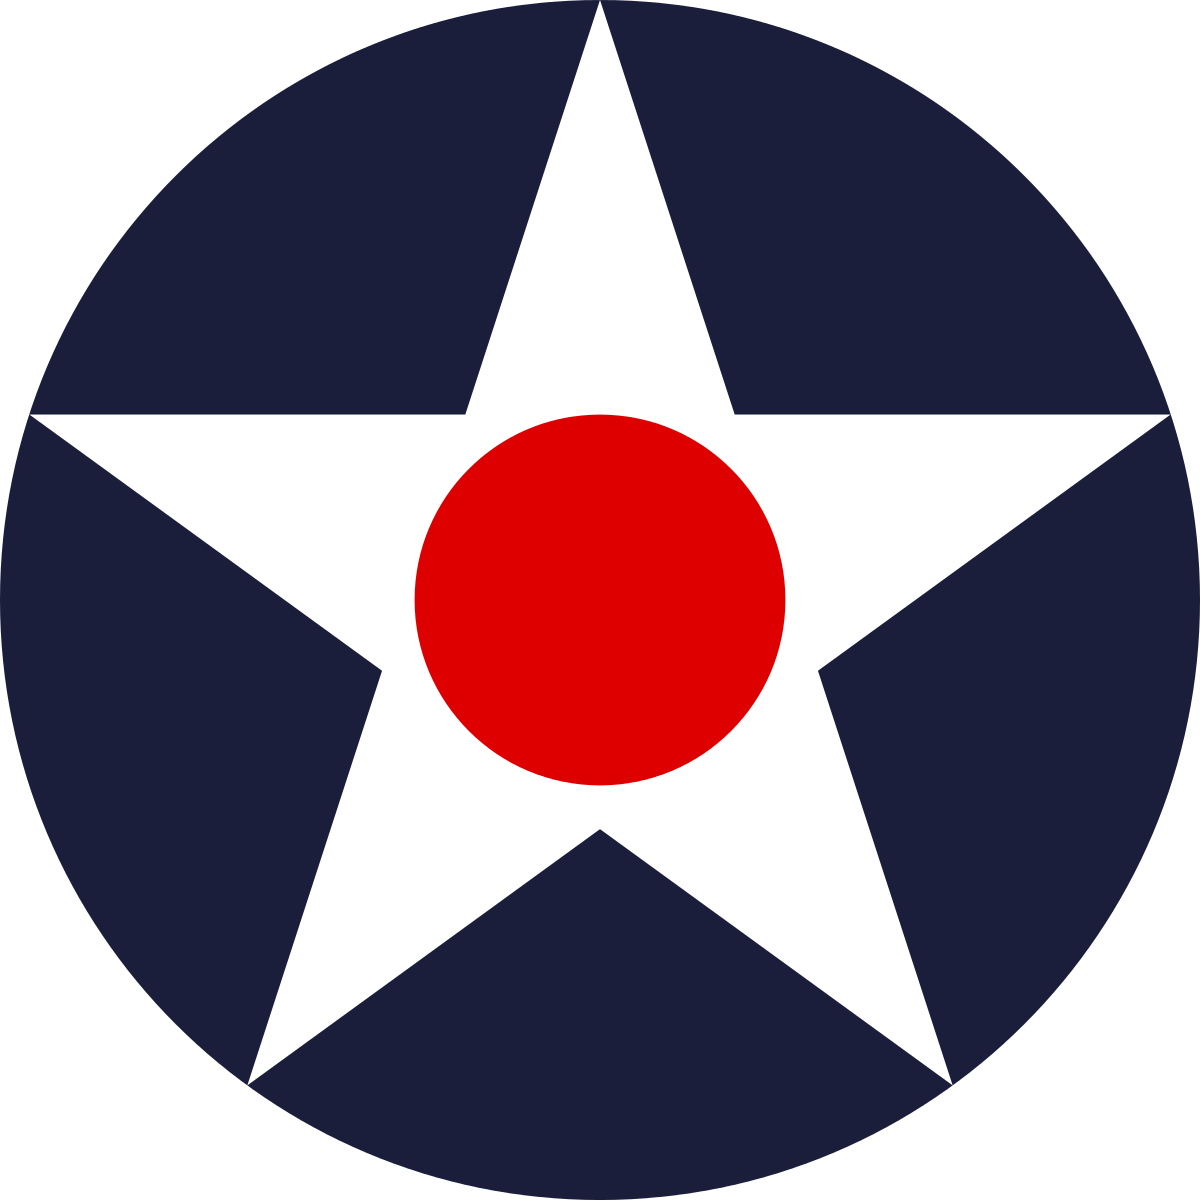 U.S. Army Air Force Logo - United States Army Air Corps